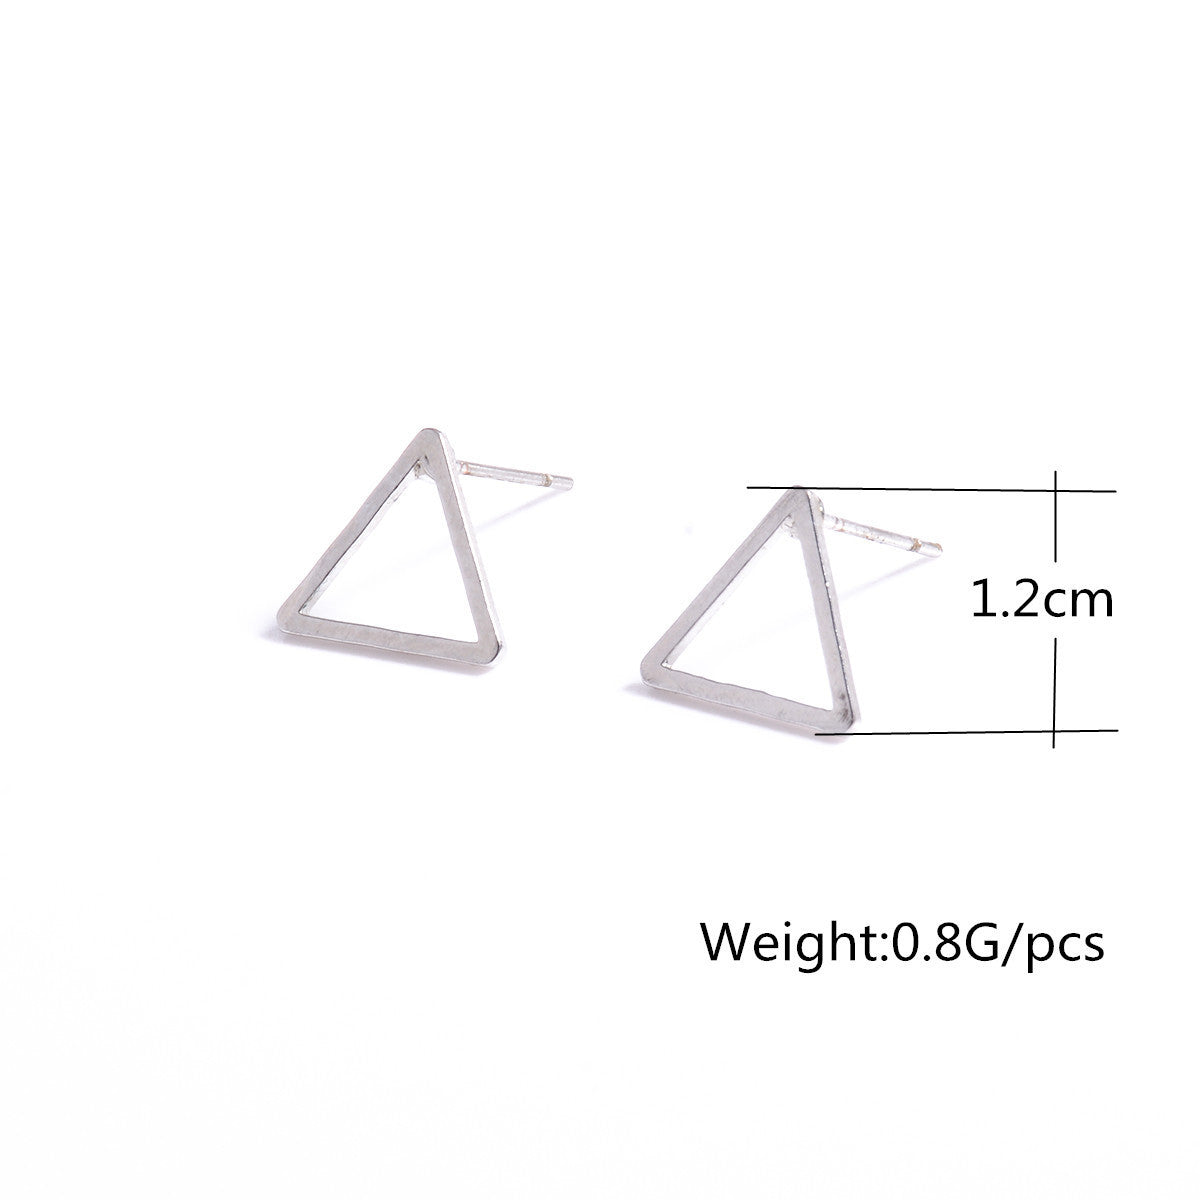 Joker Copper Smooth Triangle Earrings - Oh Yours Fashion - 4